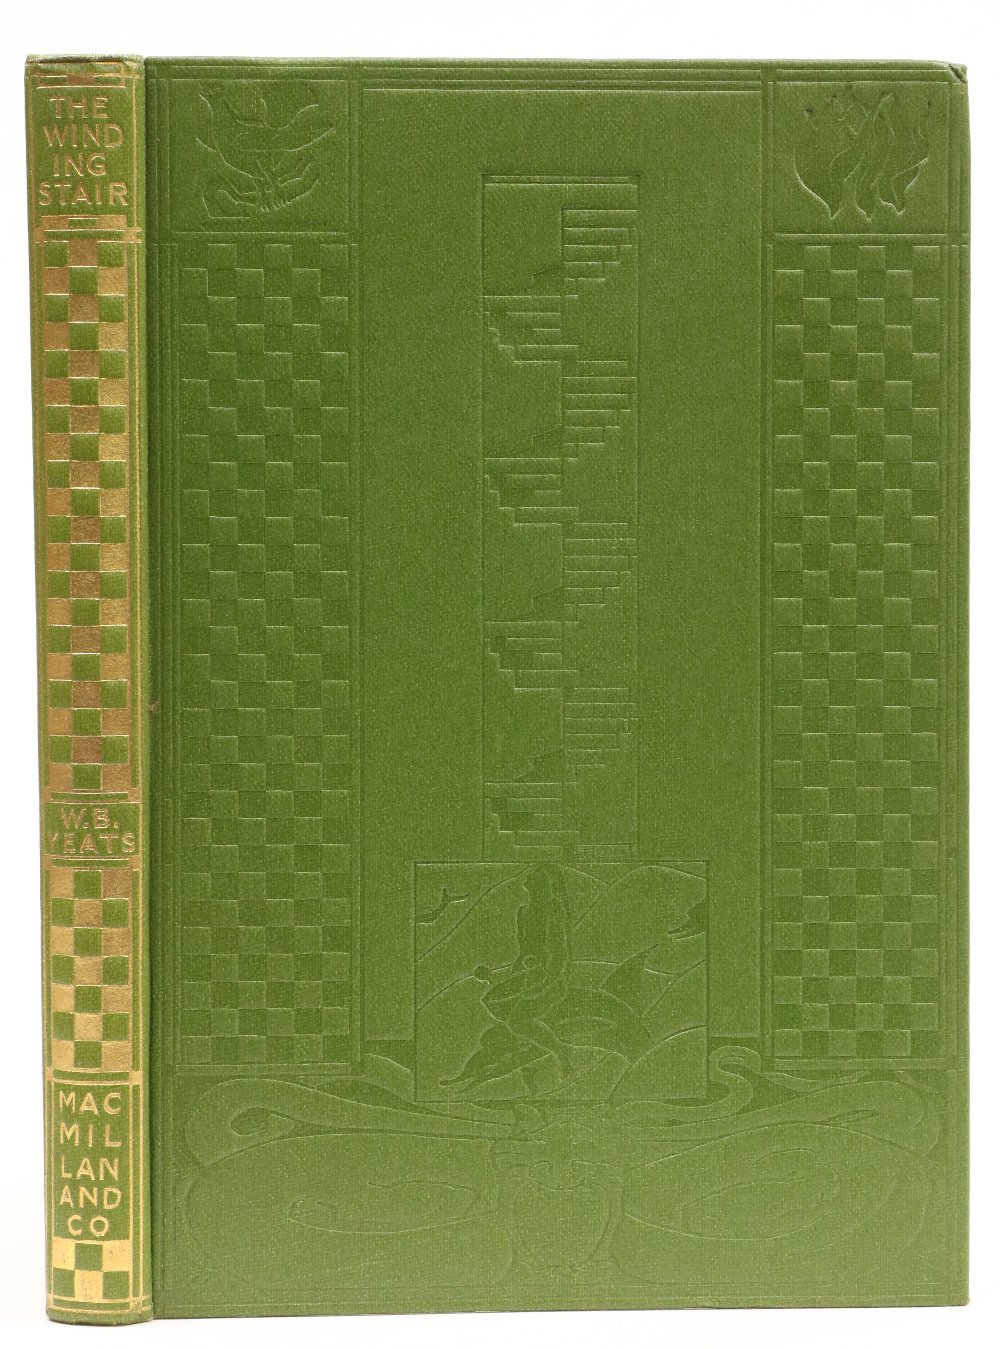 Yeats (W.B.) The Winding Stair and Other Poems, 8vo London (MacMillan & Co.) 1933. First Edn., hf.